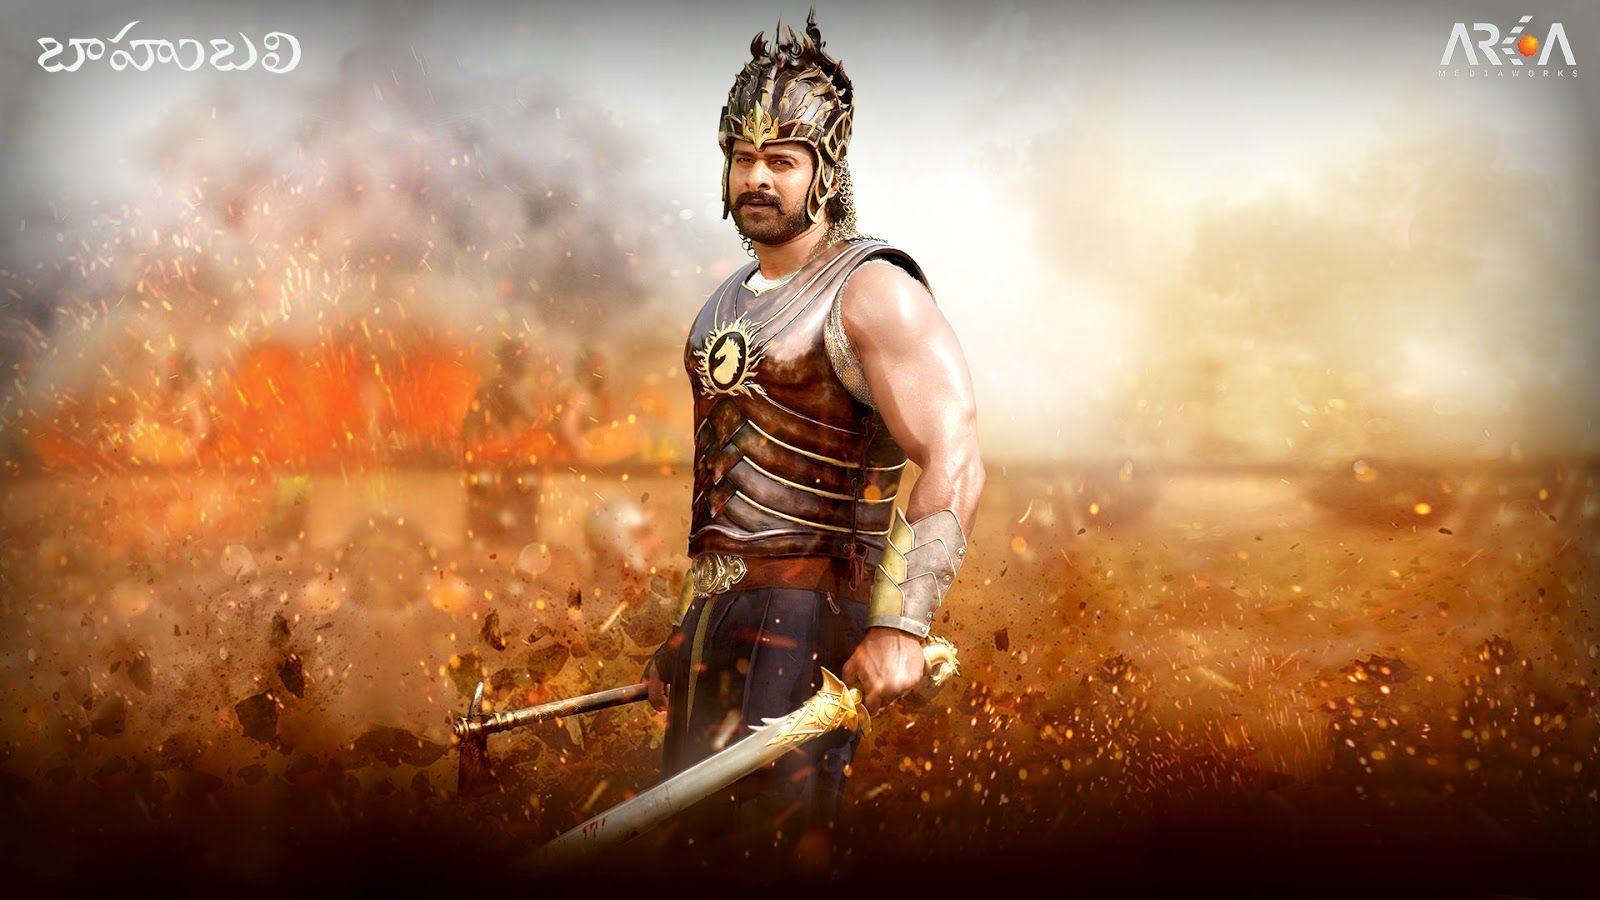 Movie Baahubali 2 The Conclusion HD Wallpaper